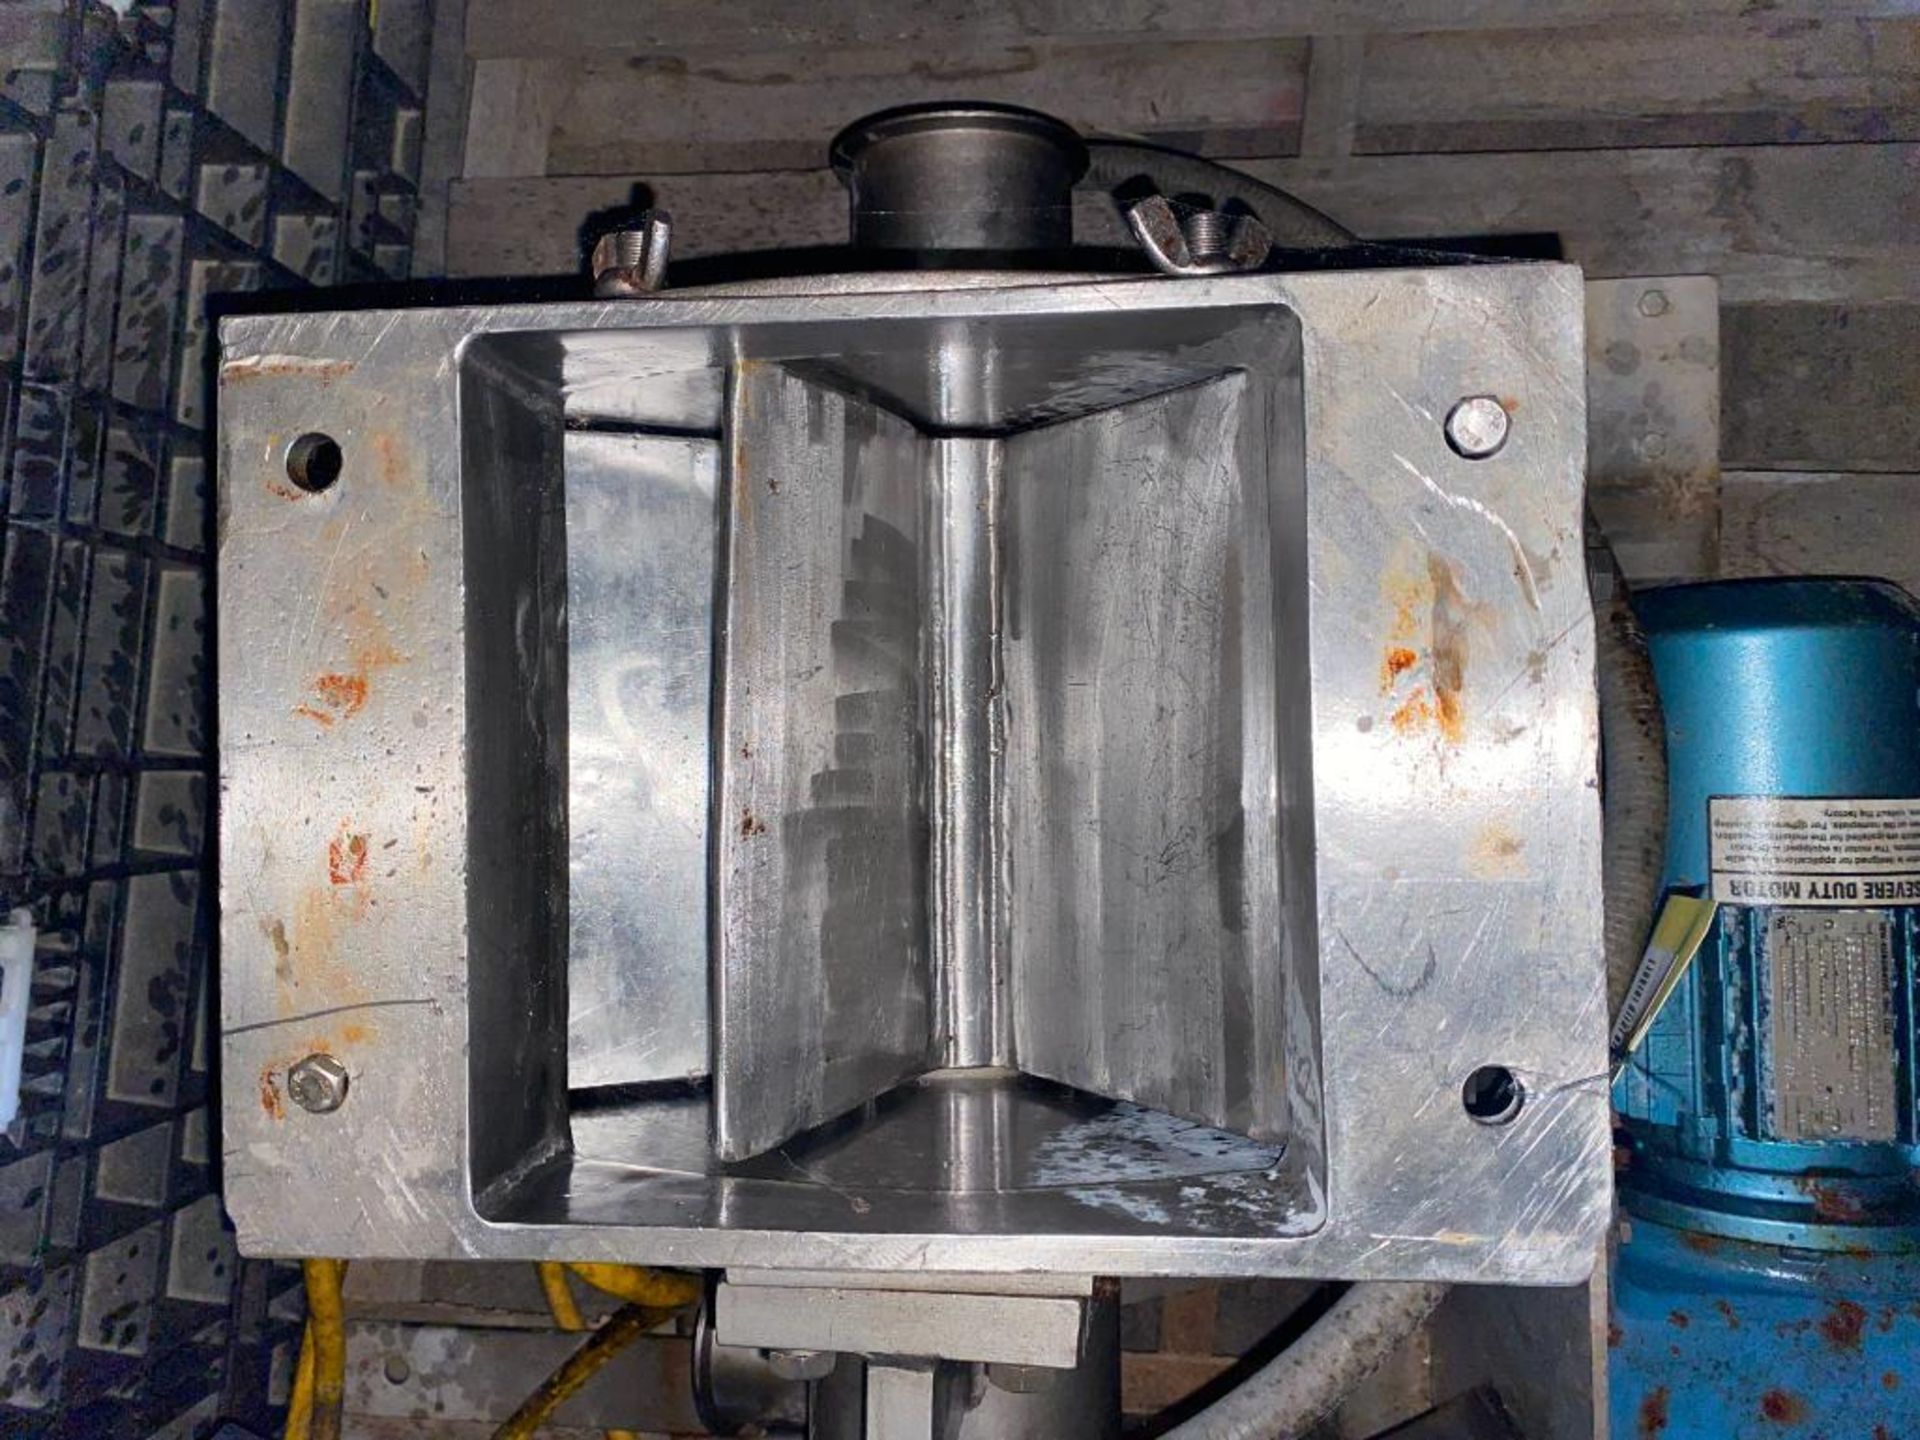 S/S 4.5" Rotary Valve, Clamp-Type with Drive (Location: Rice Lake, WI) - Rigging Fee: $100 - Image 2 of 2